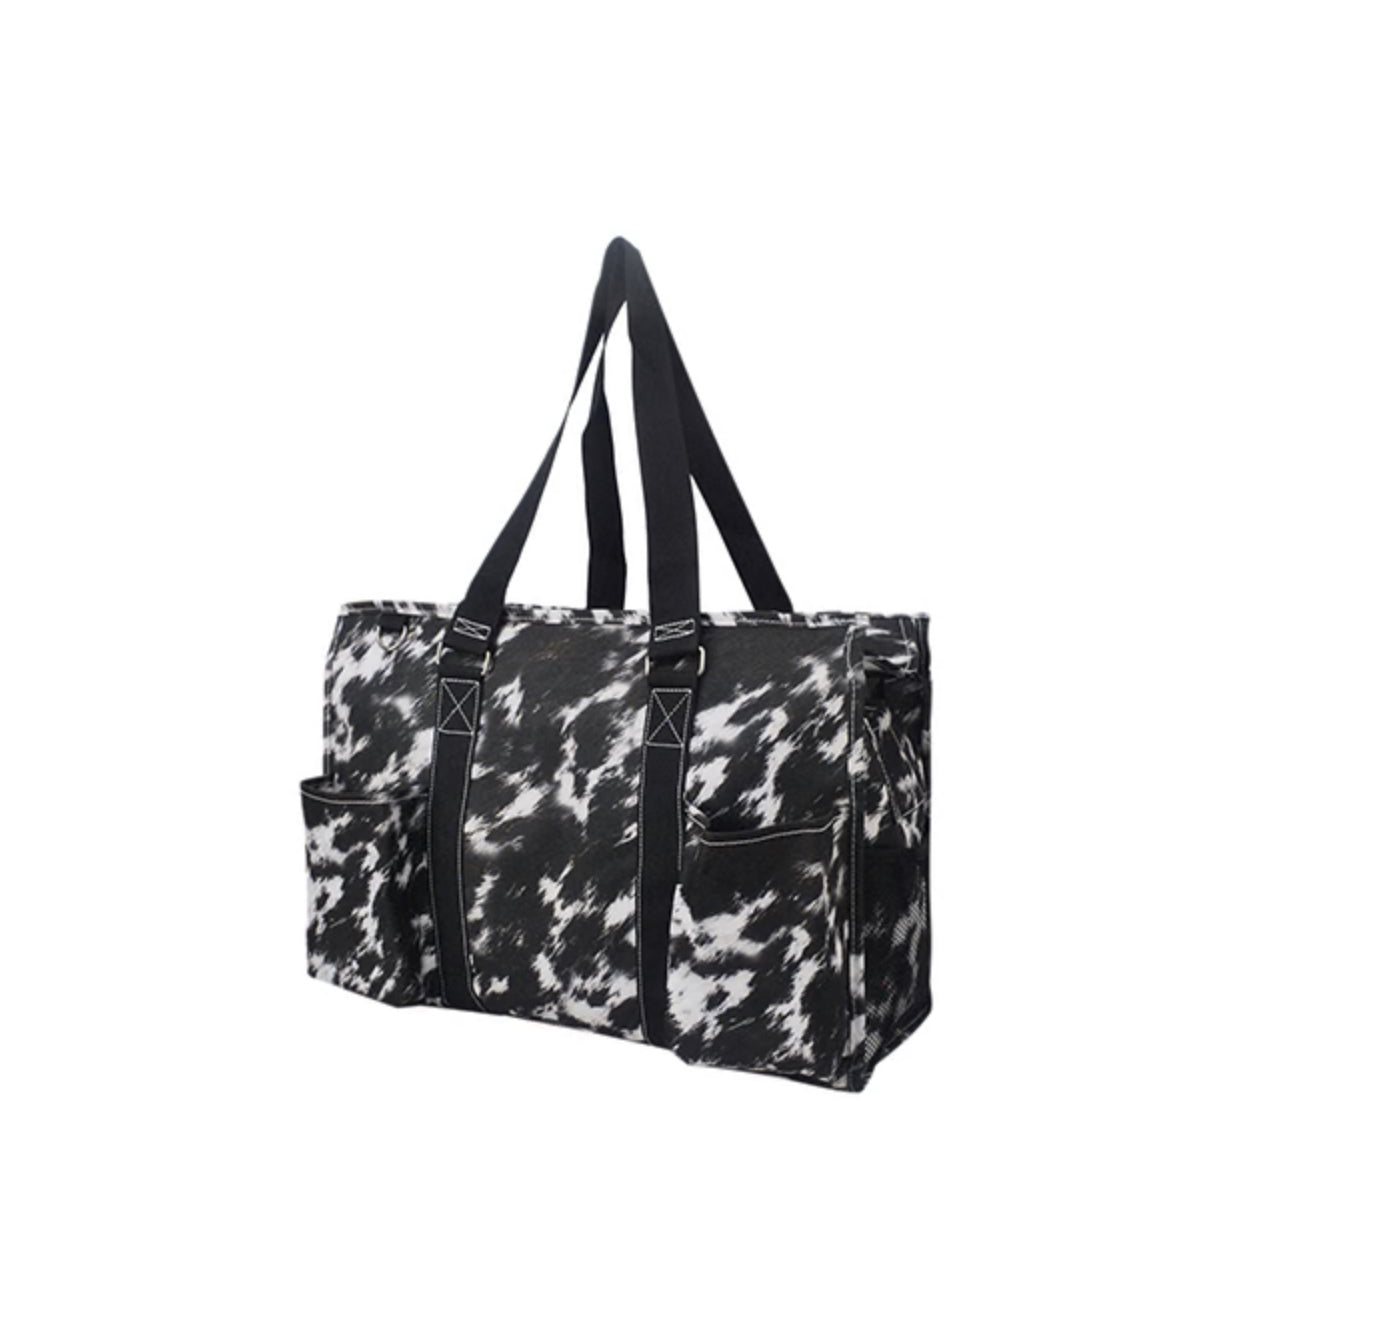 Cow Couture Organizer Tote Bag